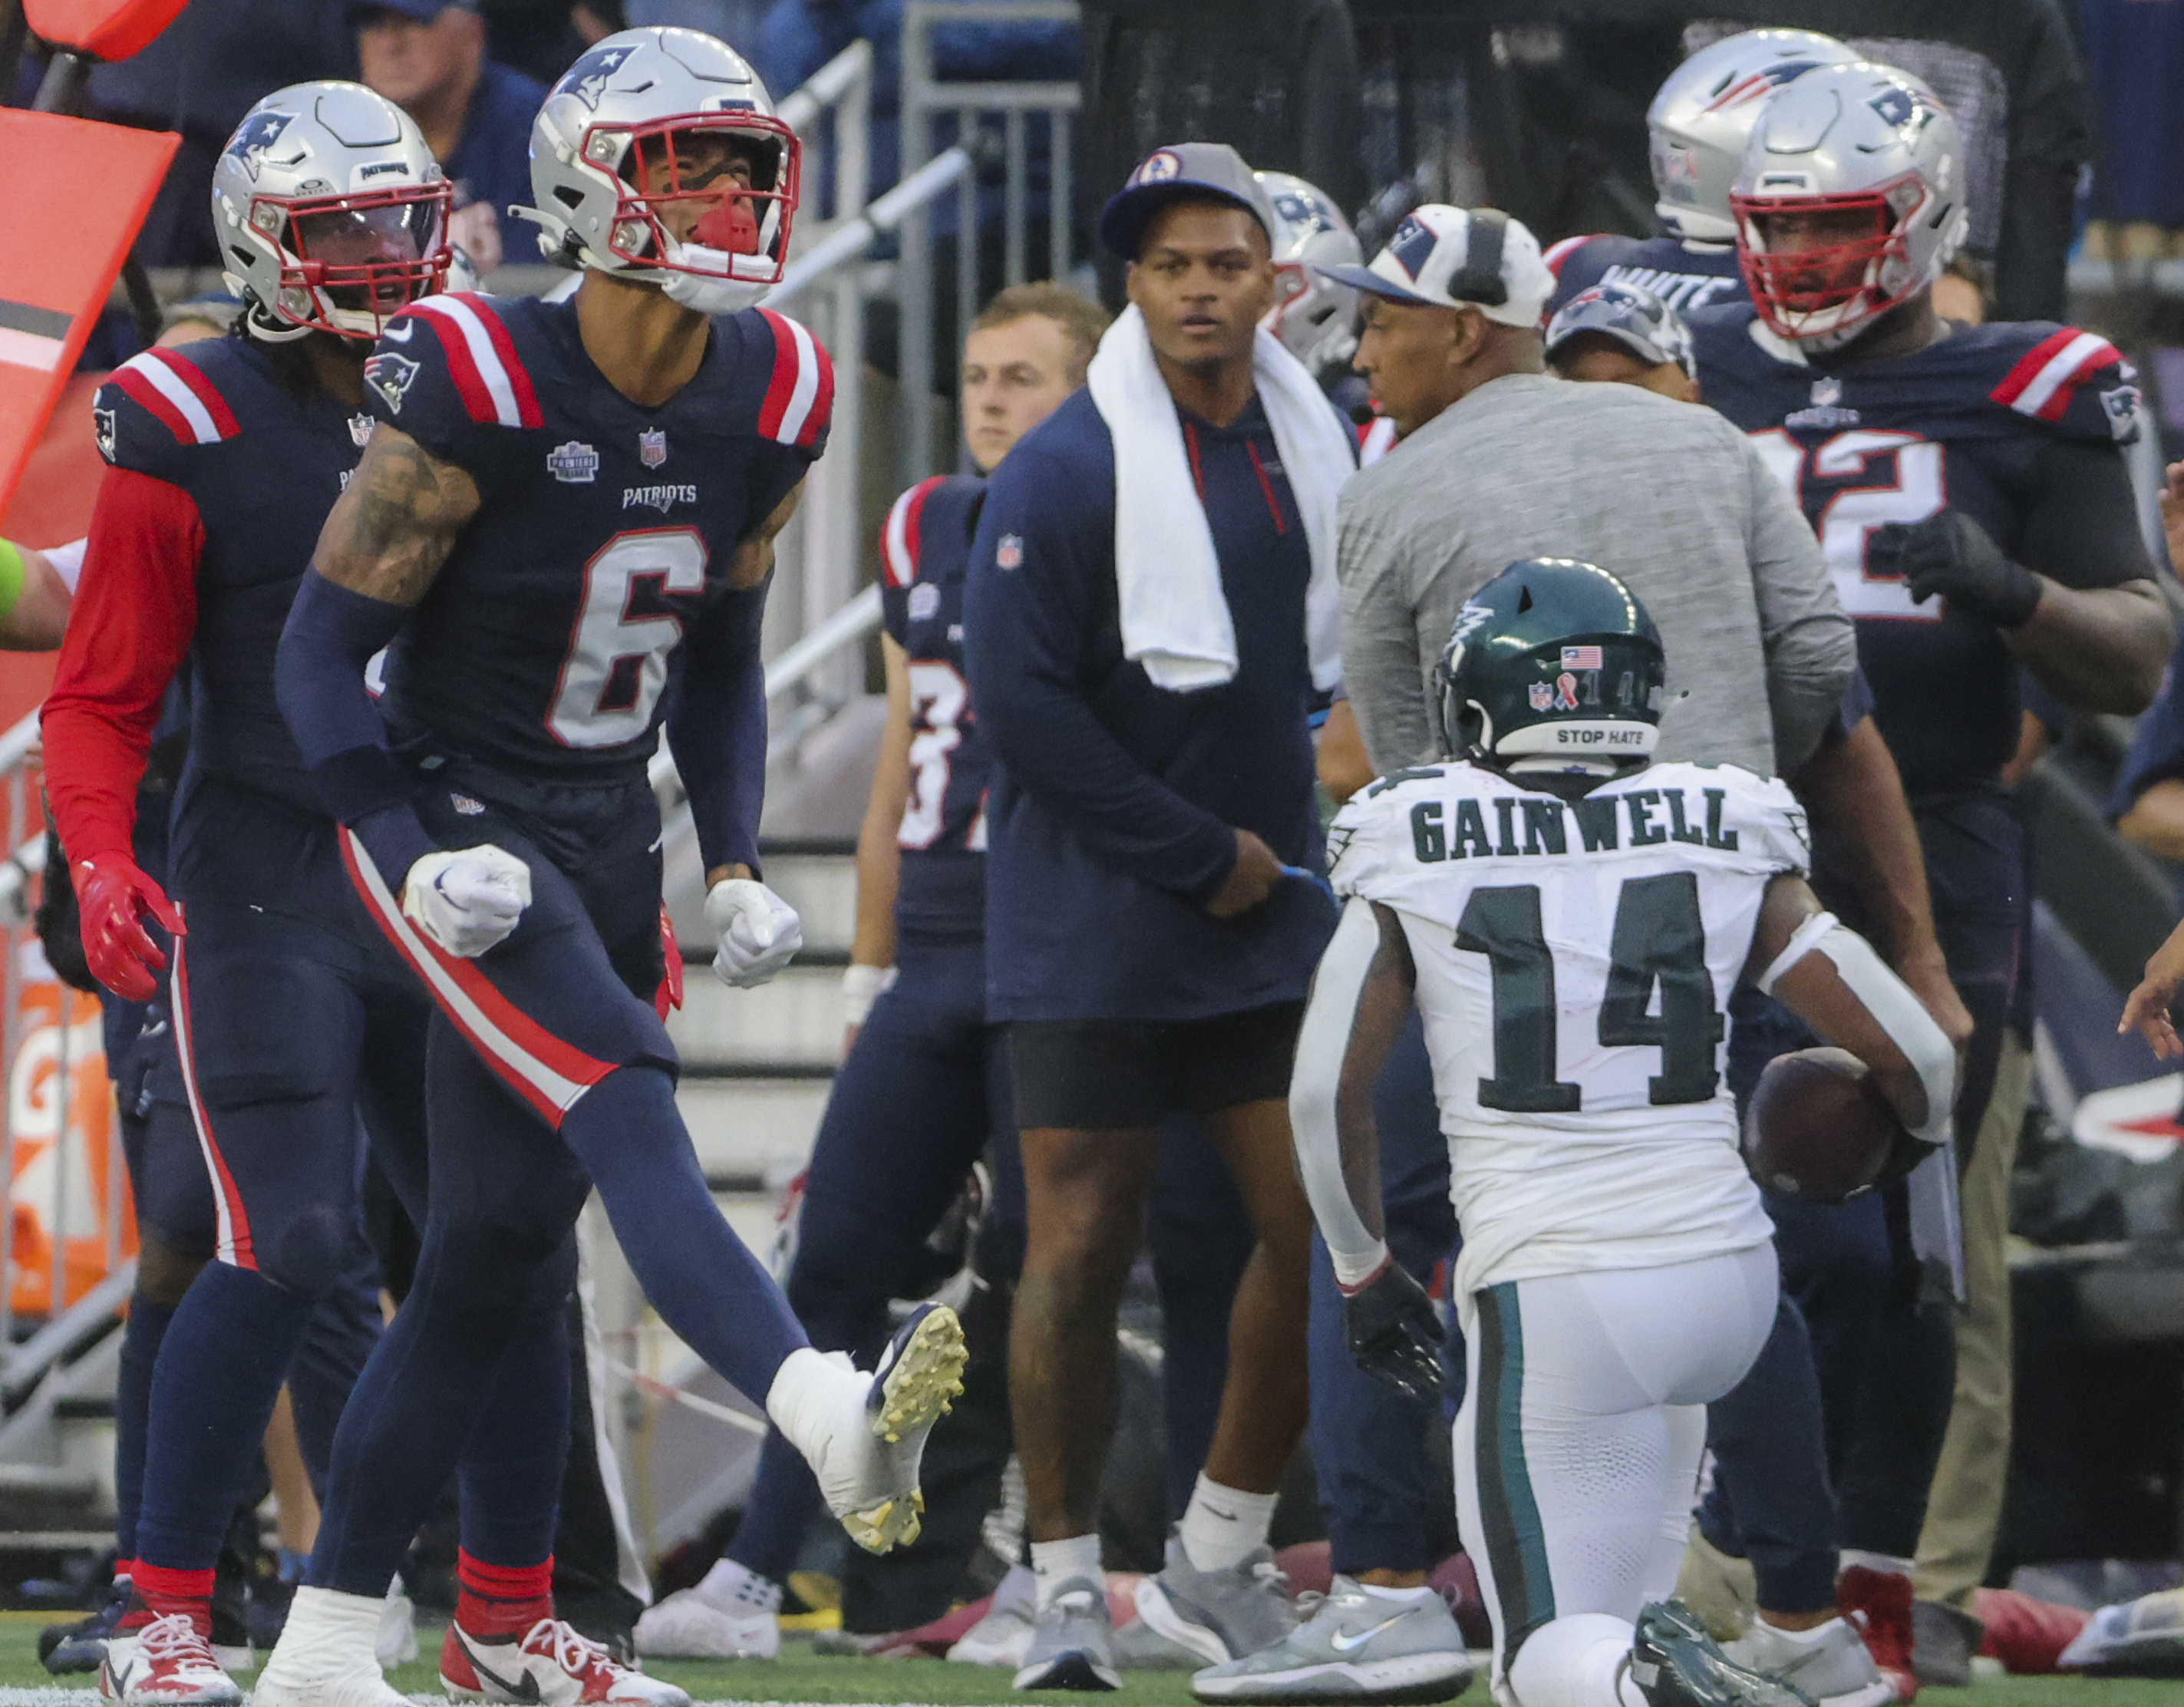 What NFL experts are saying about Sunday's Patriots-Eagles game